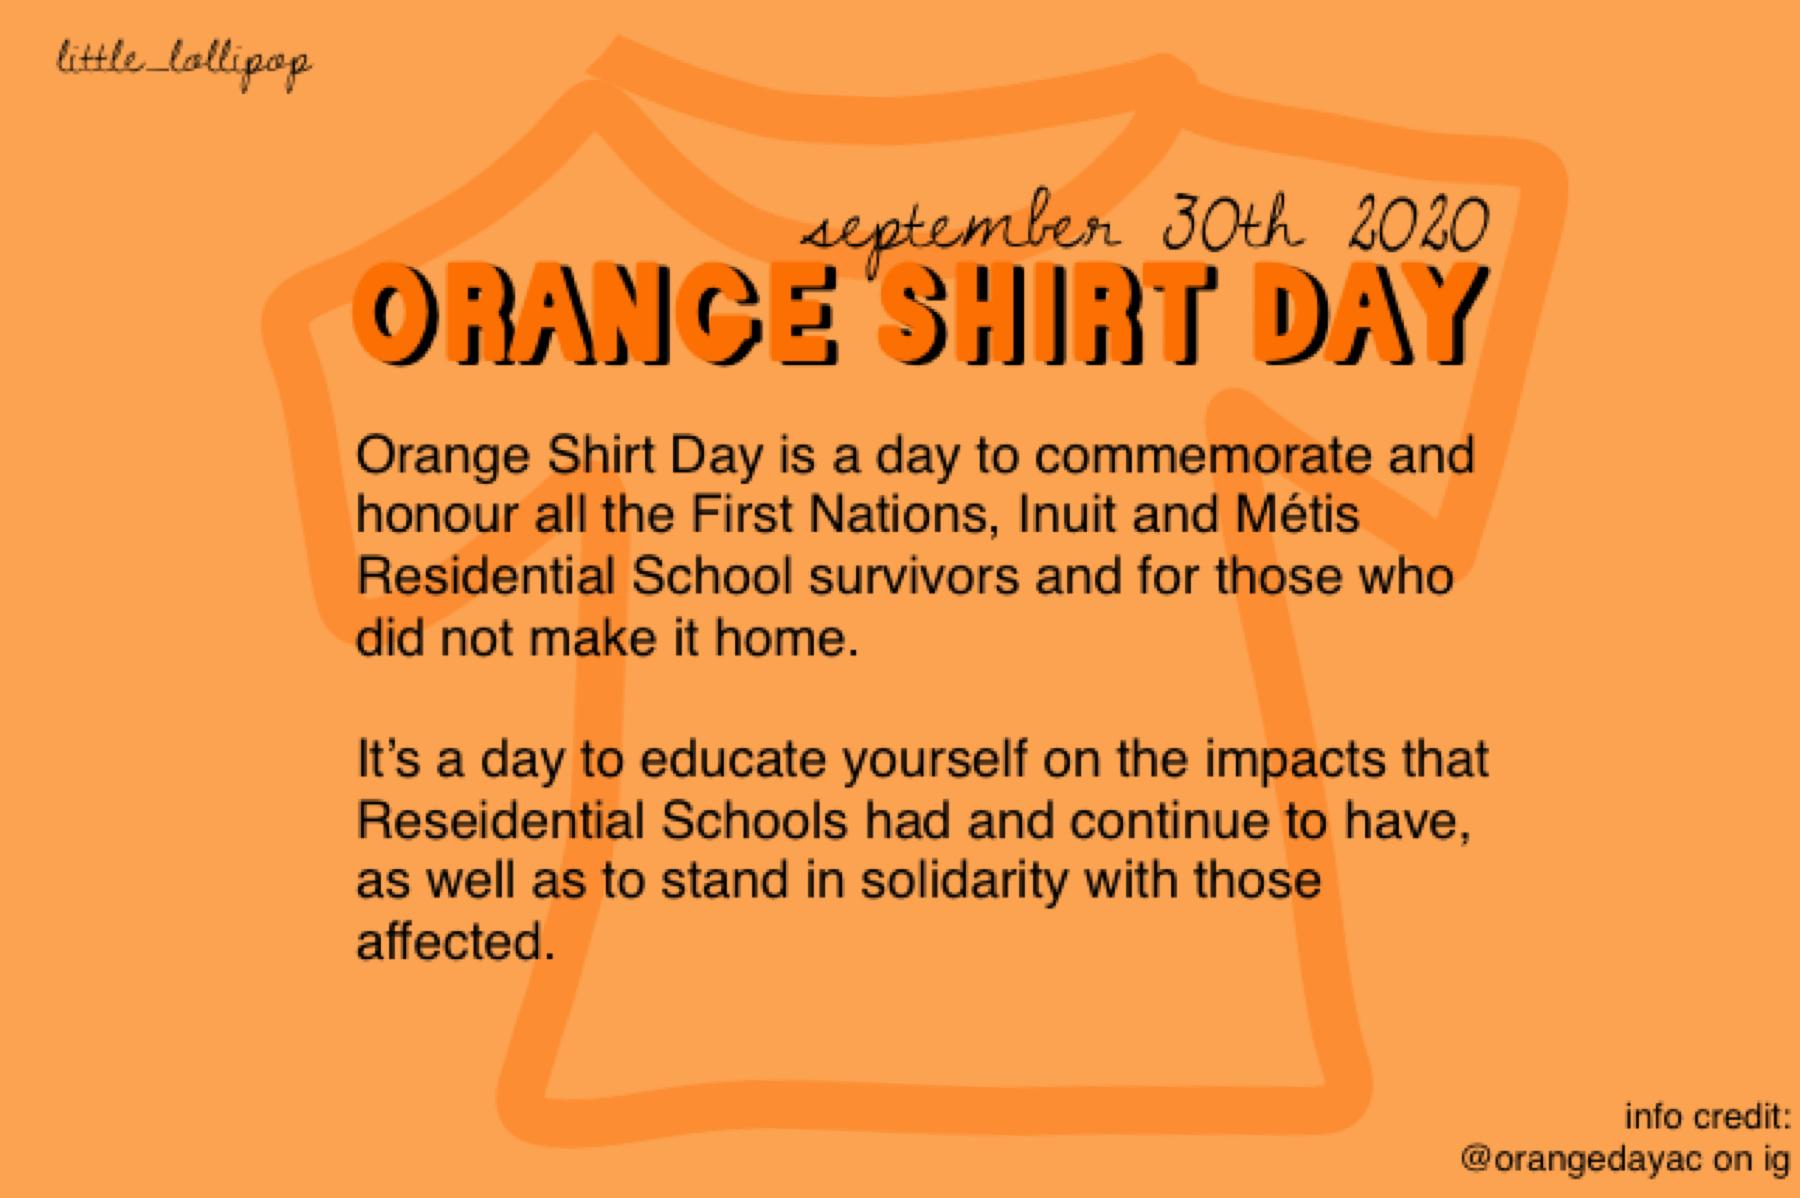 orange shirt day is a day in canada where we remember and educate ourselves on the lasting effects of residential schools🧡 i will be putting more information about it in the remixes, feel free to take a look:)